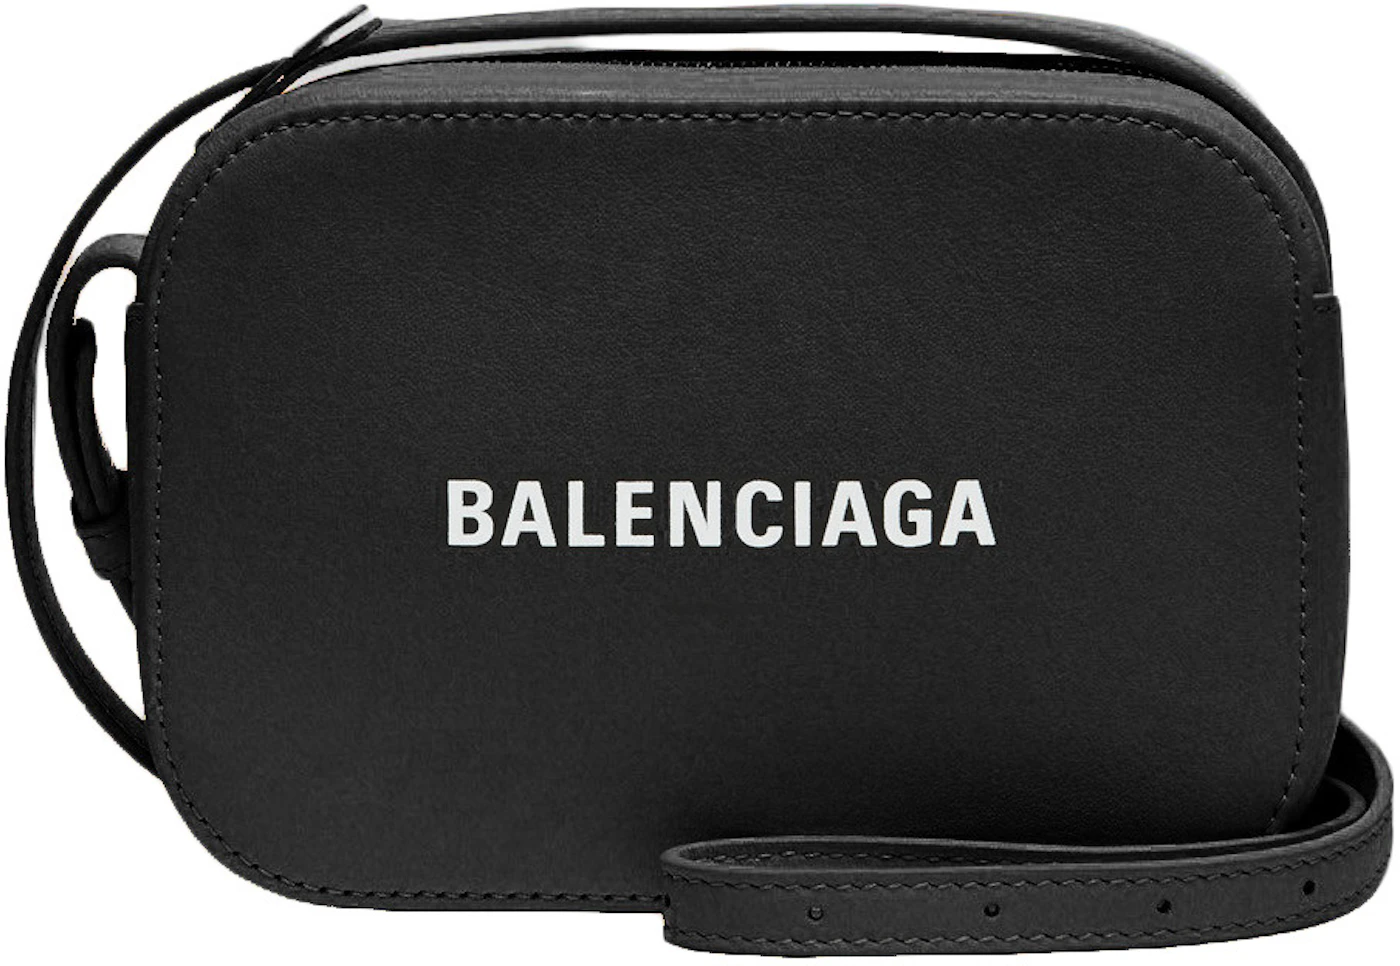 Balenciaga Everyday Camera Shoulder Bag XS Pink in Leather with